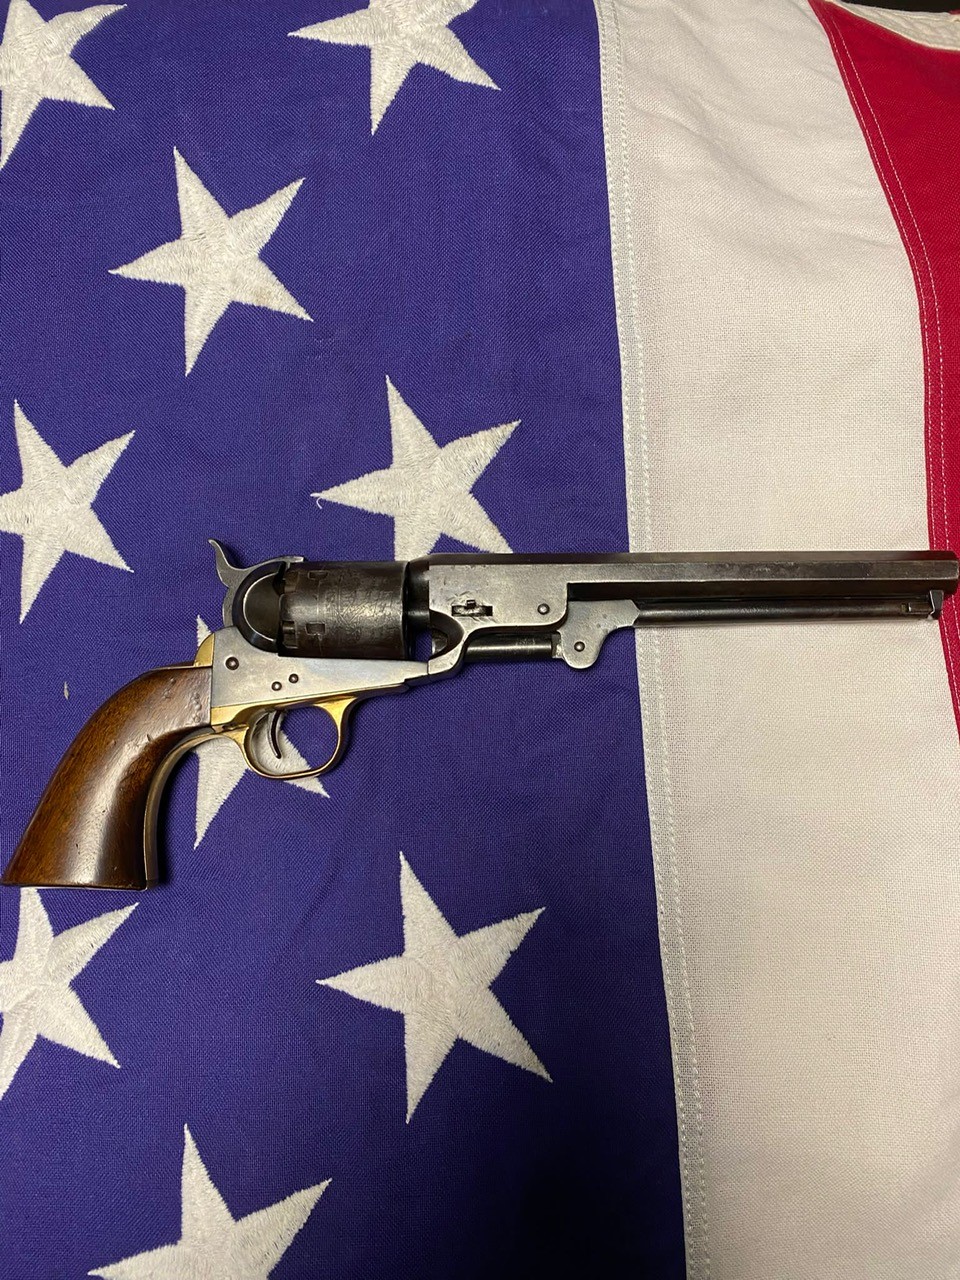 Colt Navy M1851 in cal. 36 